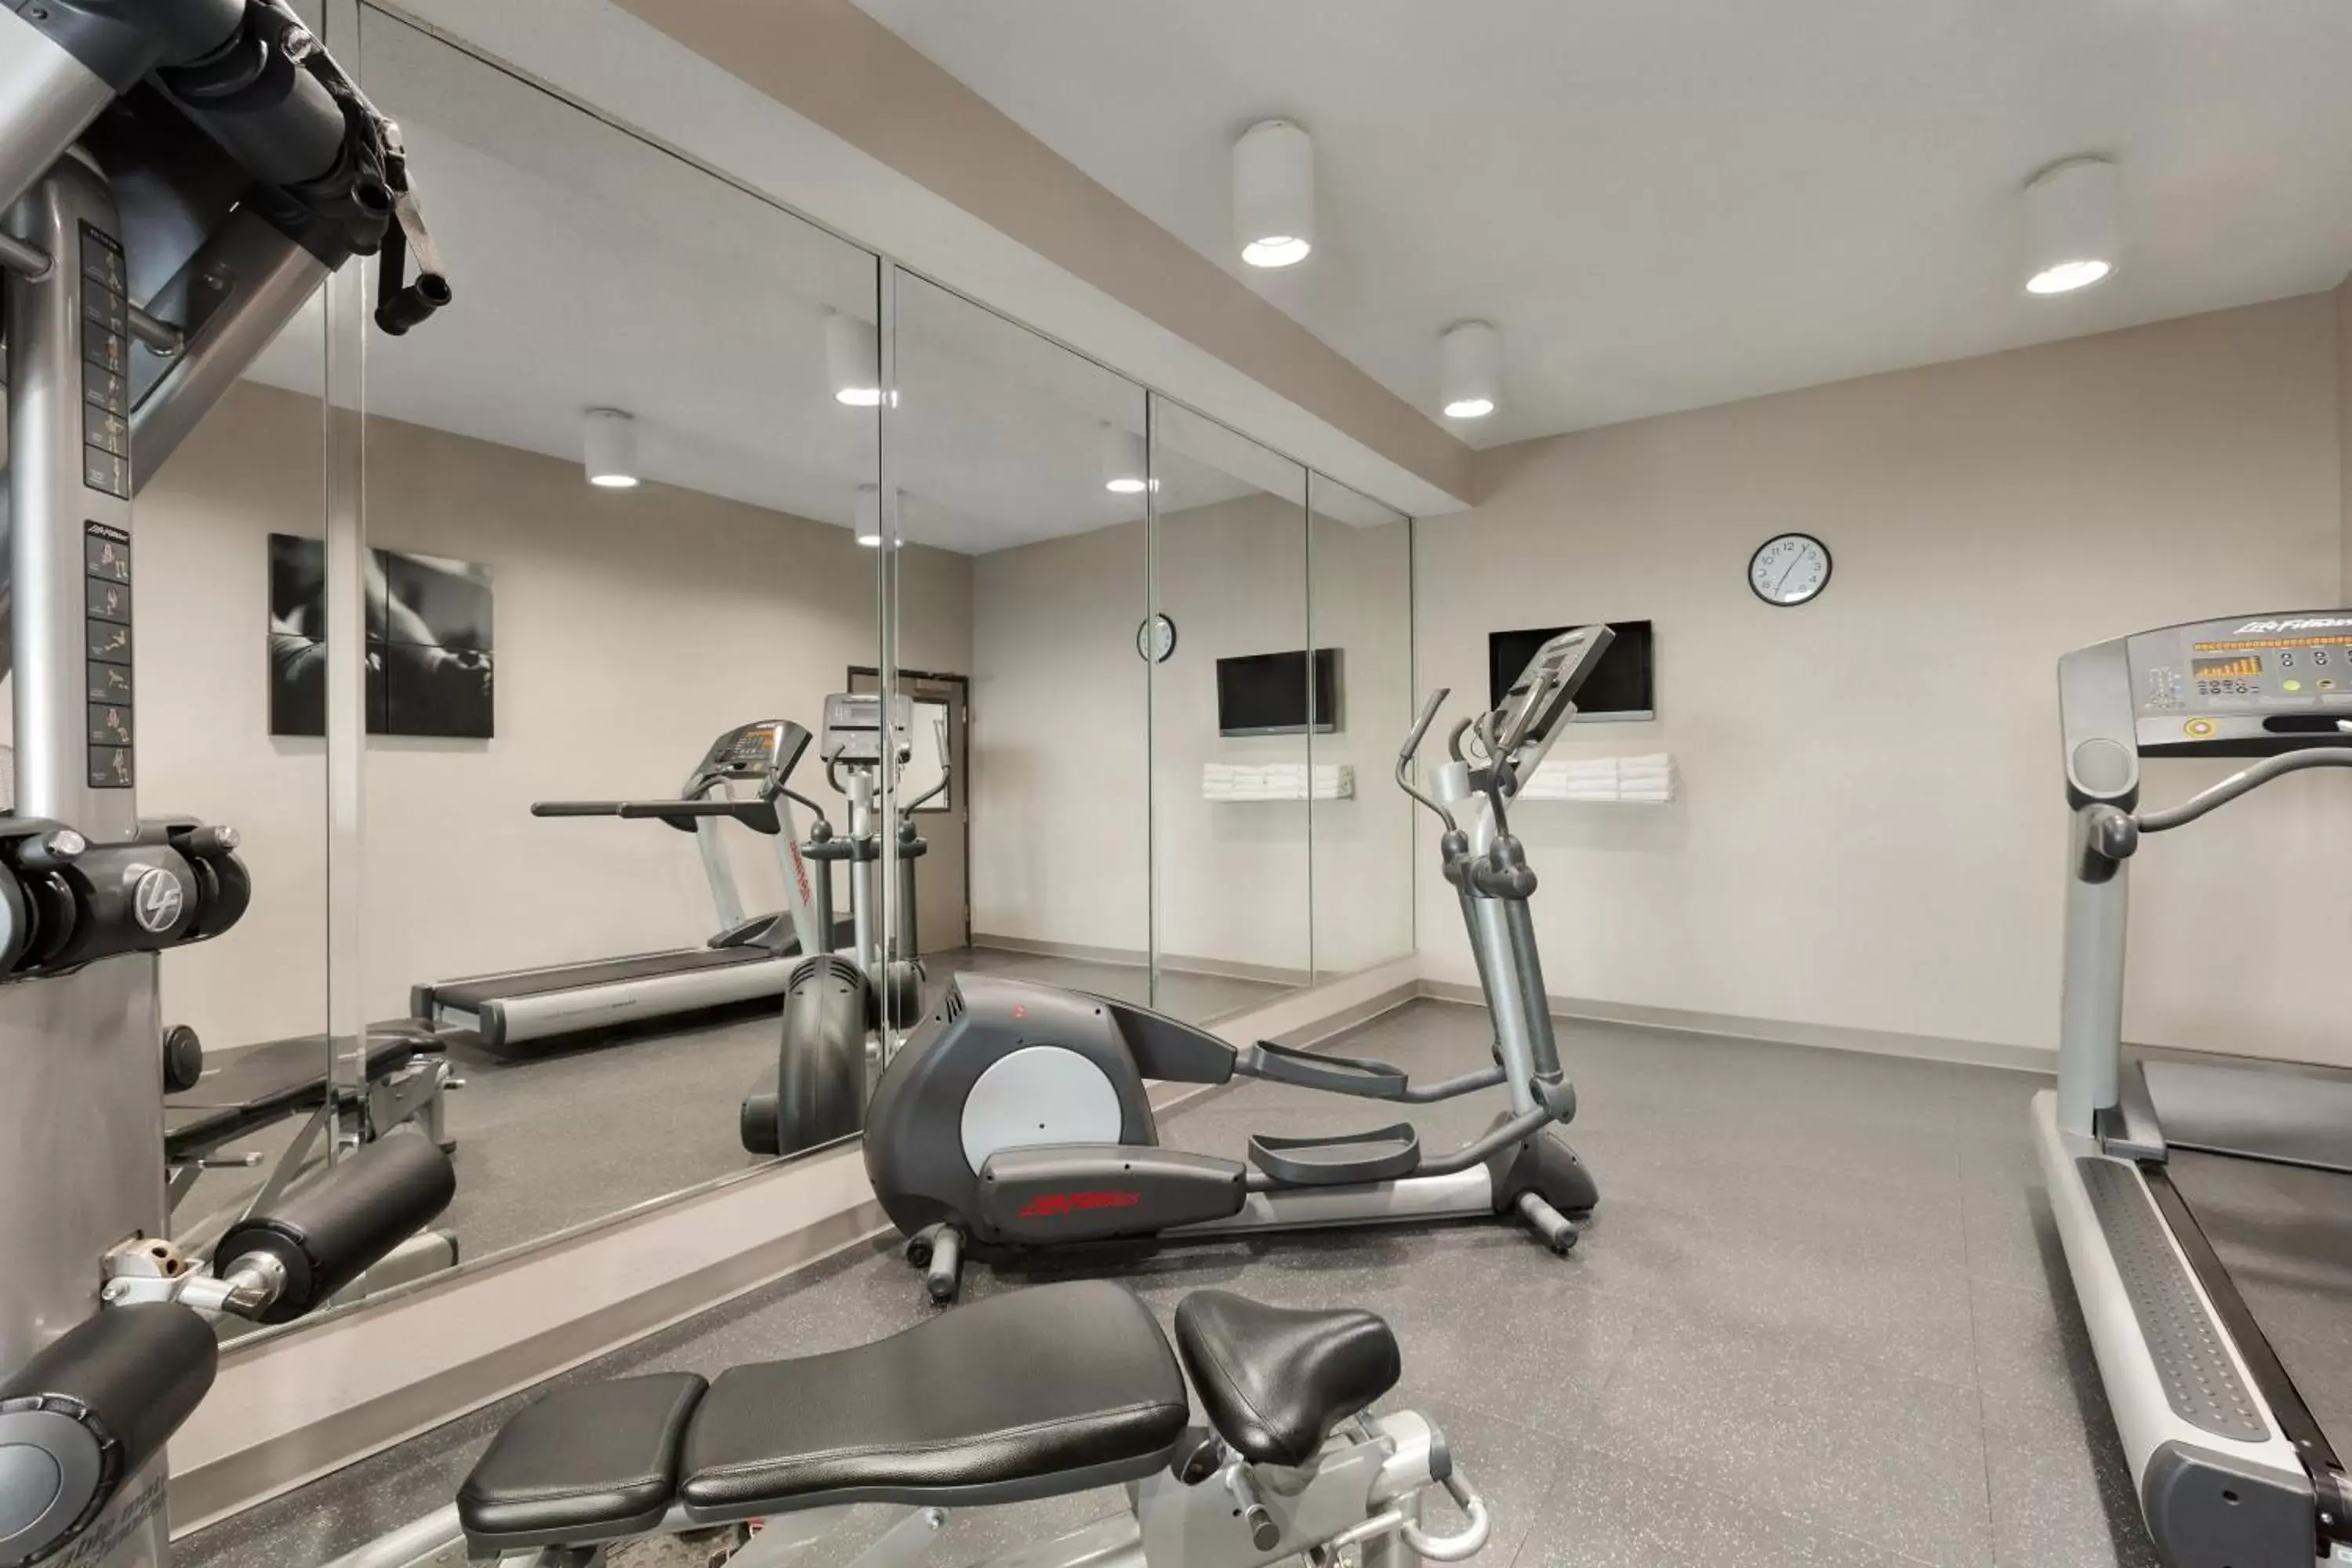 Fitness centre/facilities, Fitness Center/Facilities in Country Inn & Suites by Radisson, Warner Robins, GA